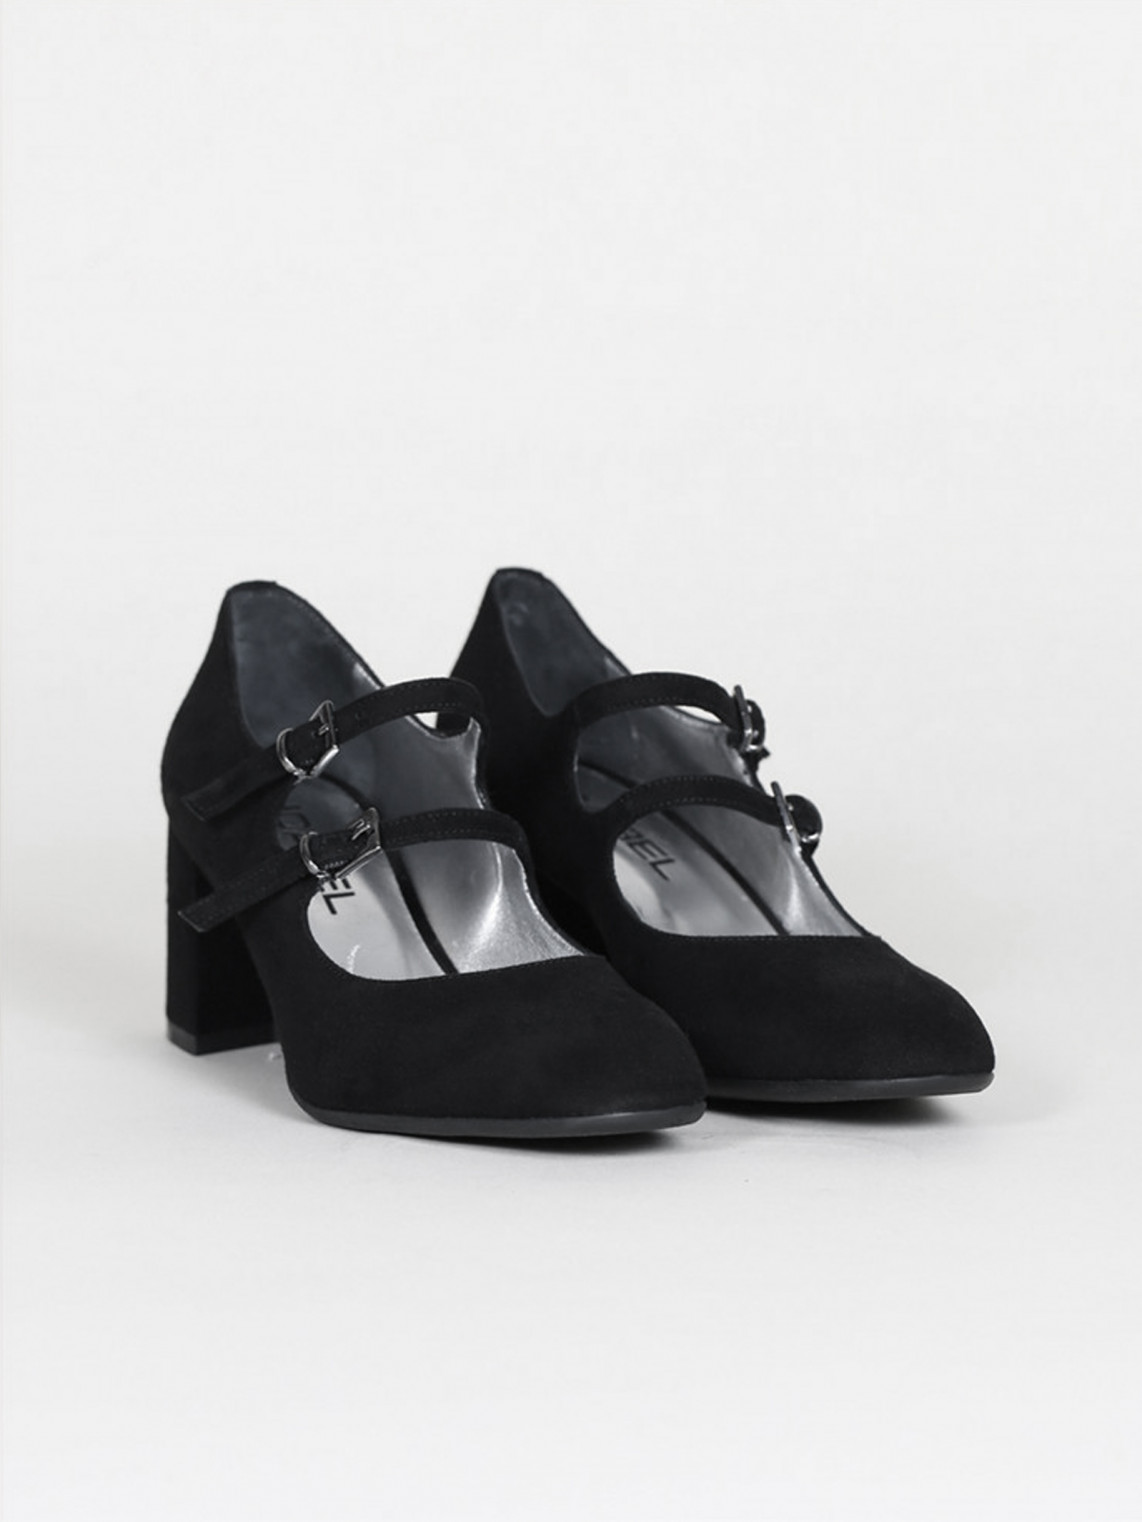 ALICE silver leather Mary Janes | Carel Paris Shoes